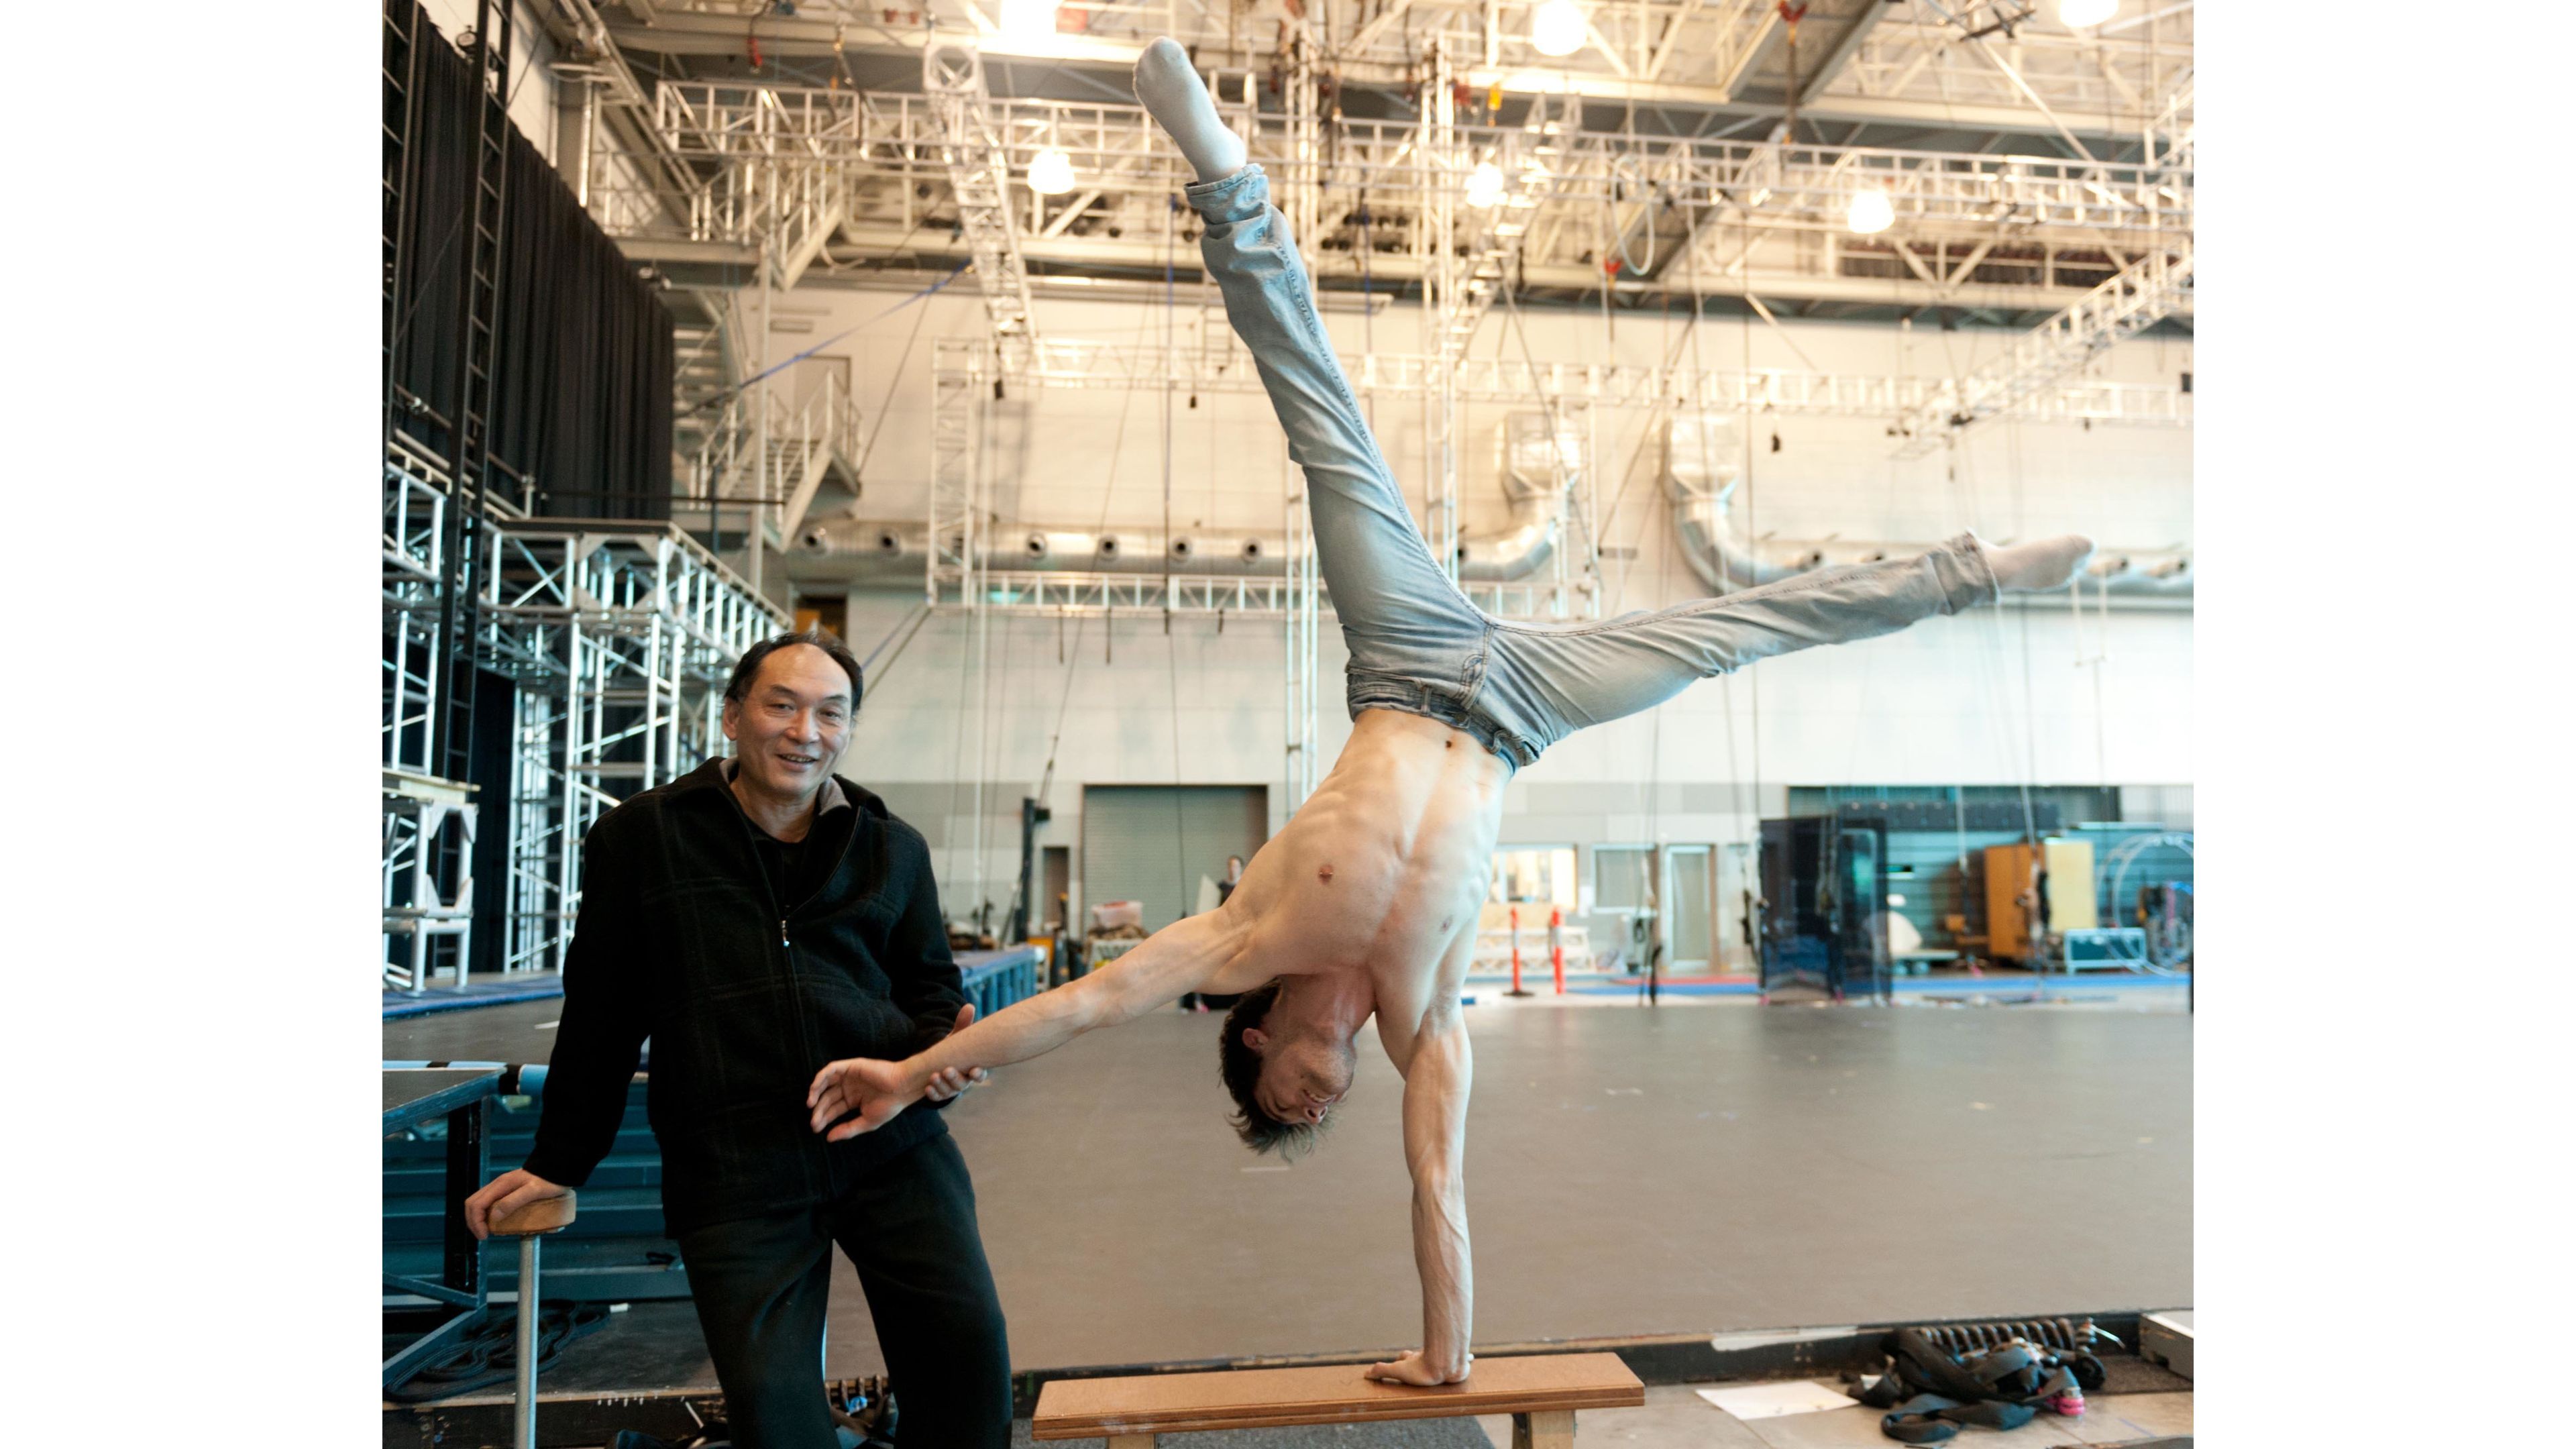 An instructor smiles at the camera while training an acrobat who is performing a one-arm handstand